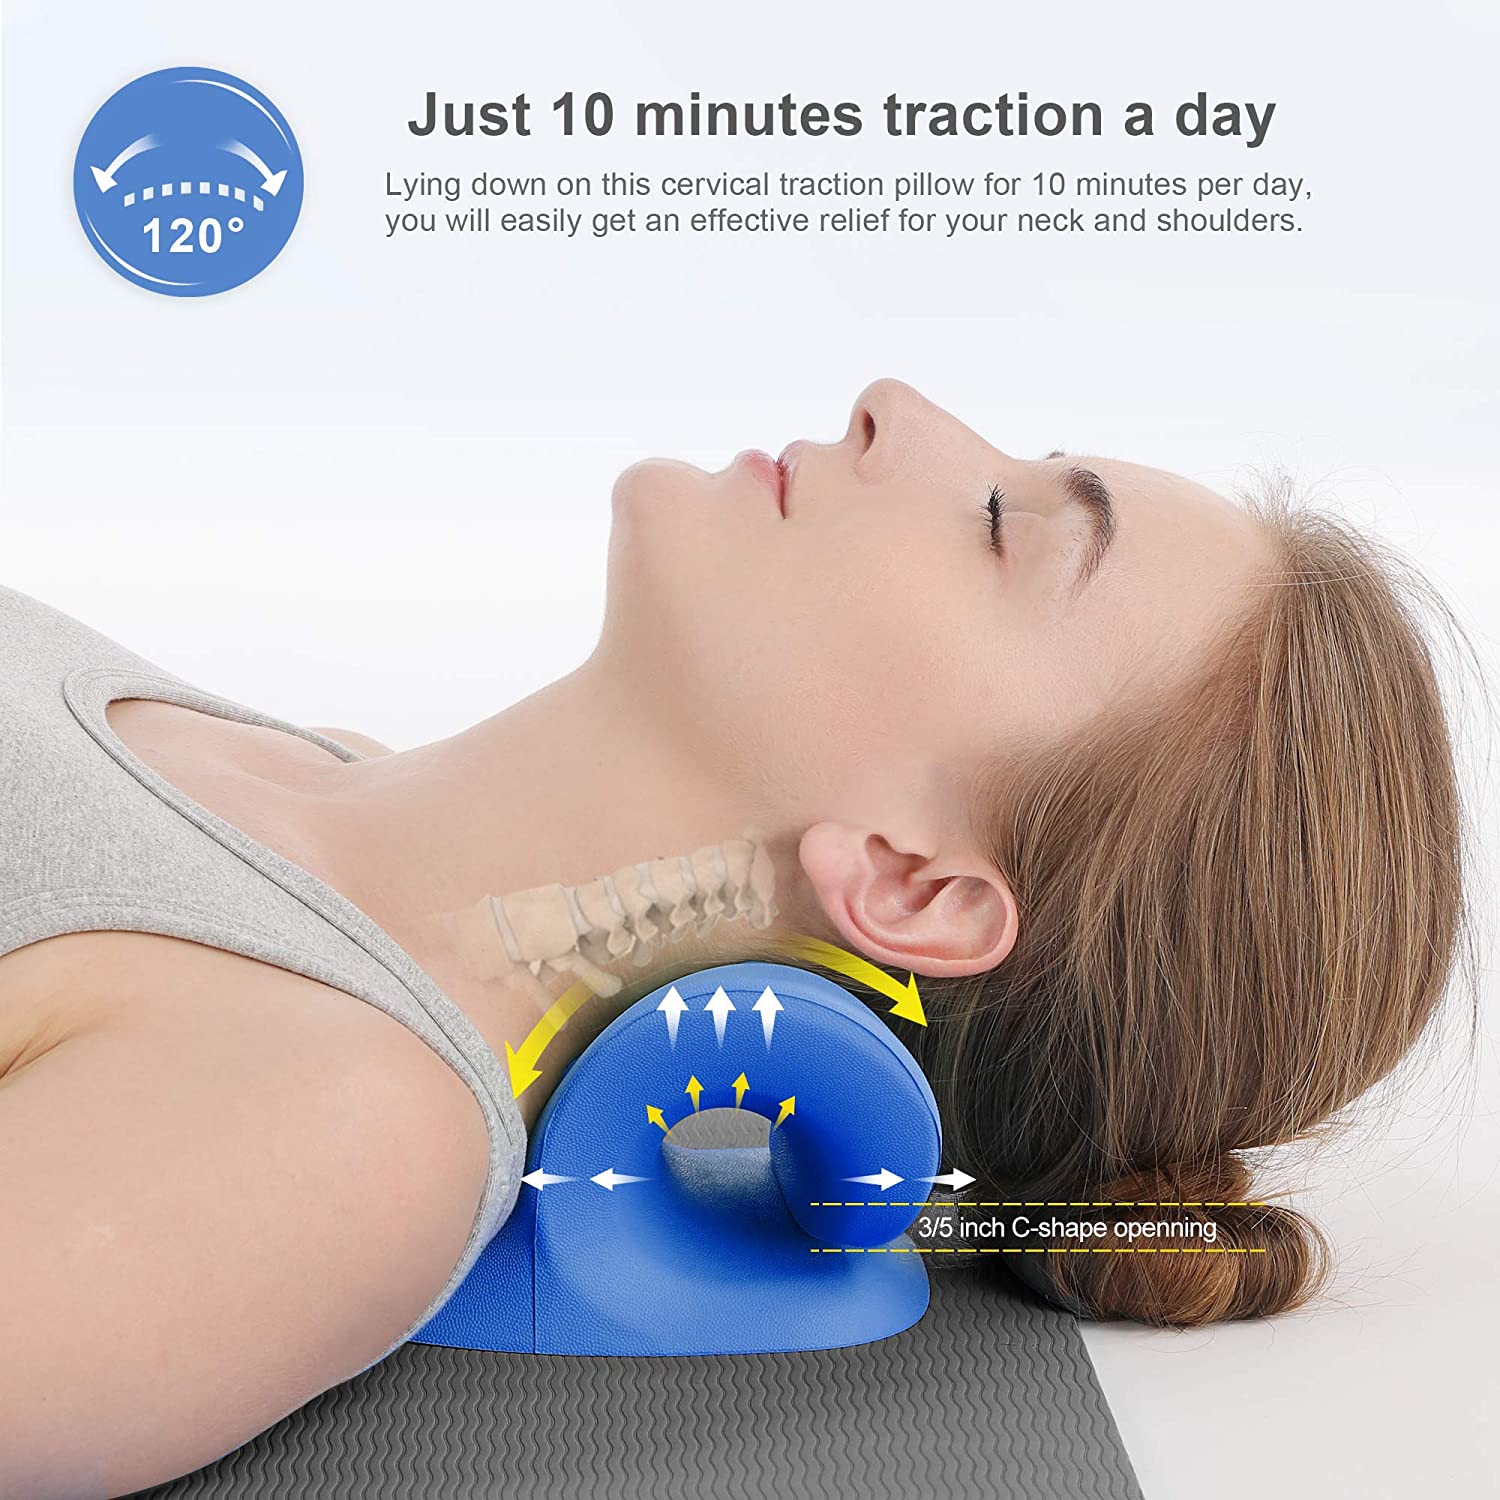 Neck Traction Pillow - Cervical Traction Pillow